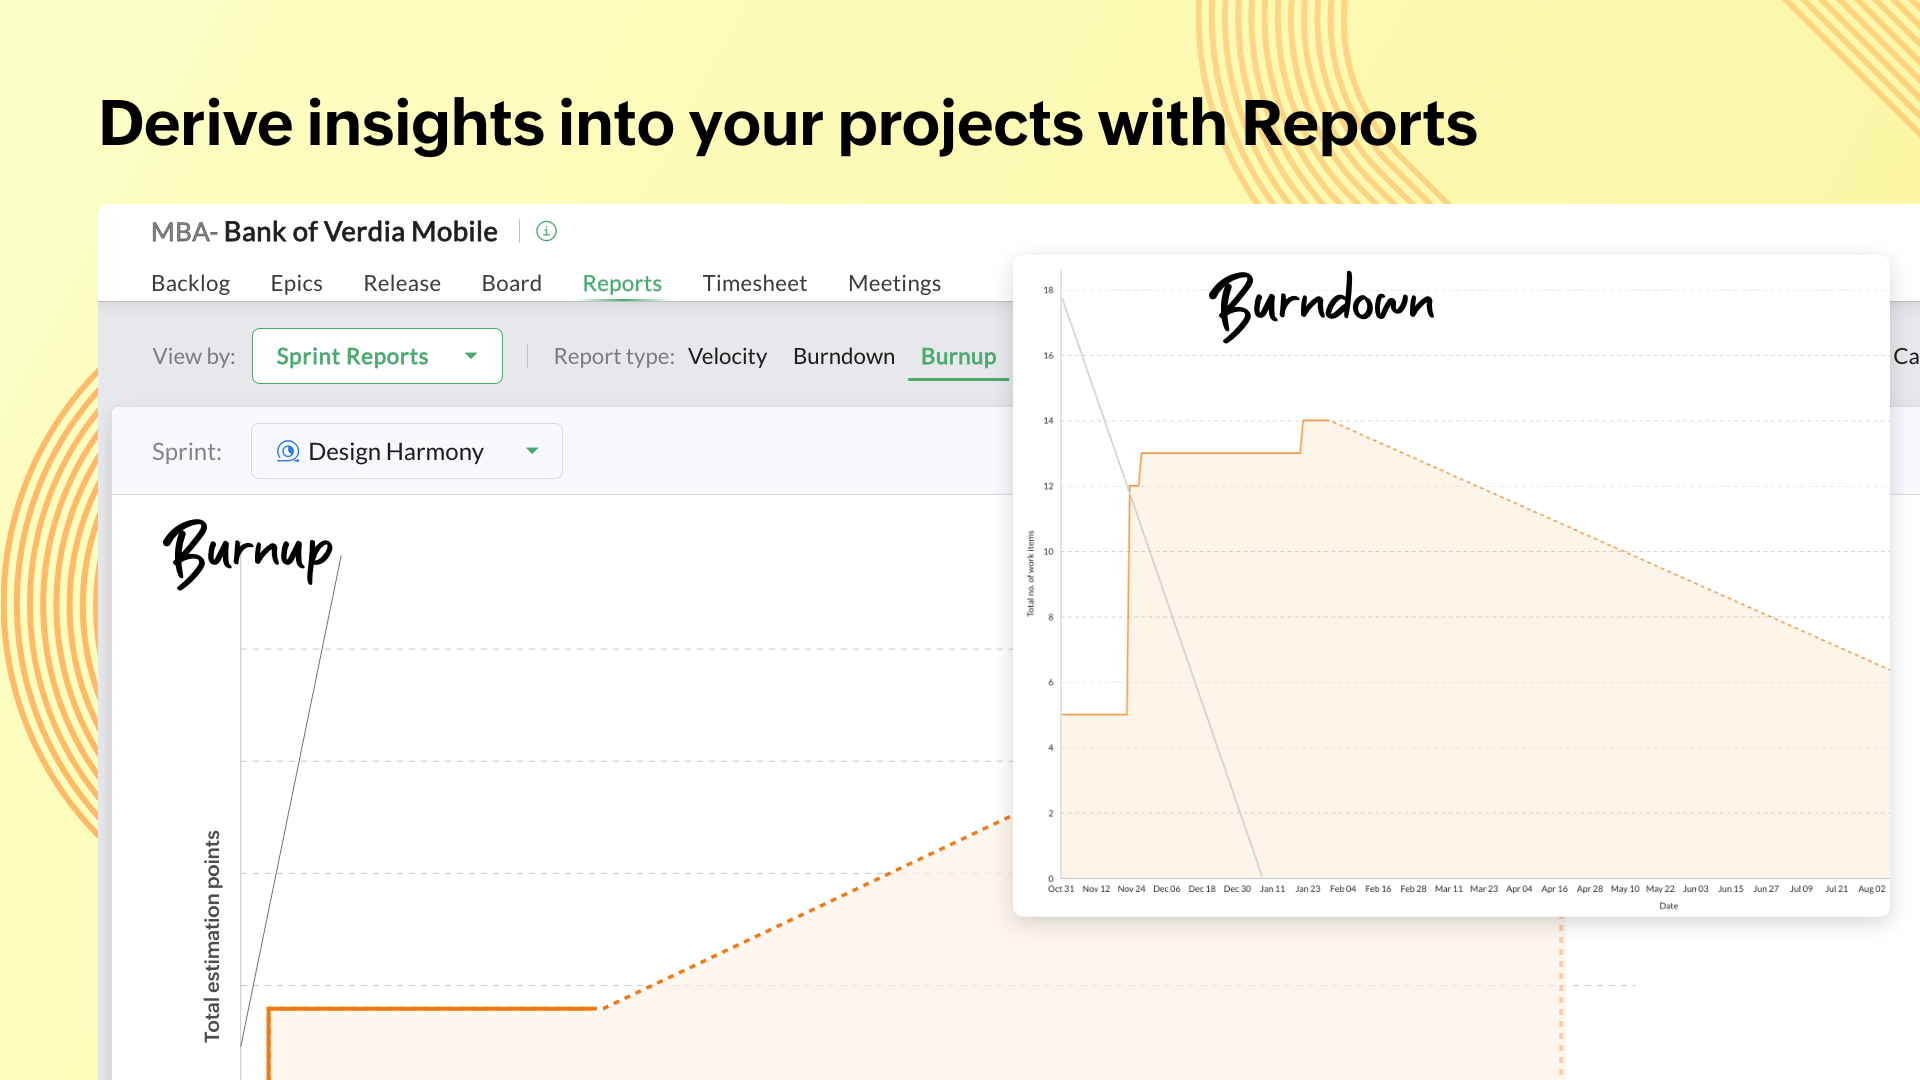 Derive insights into your projects with Reports